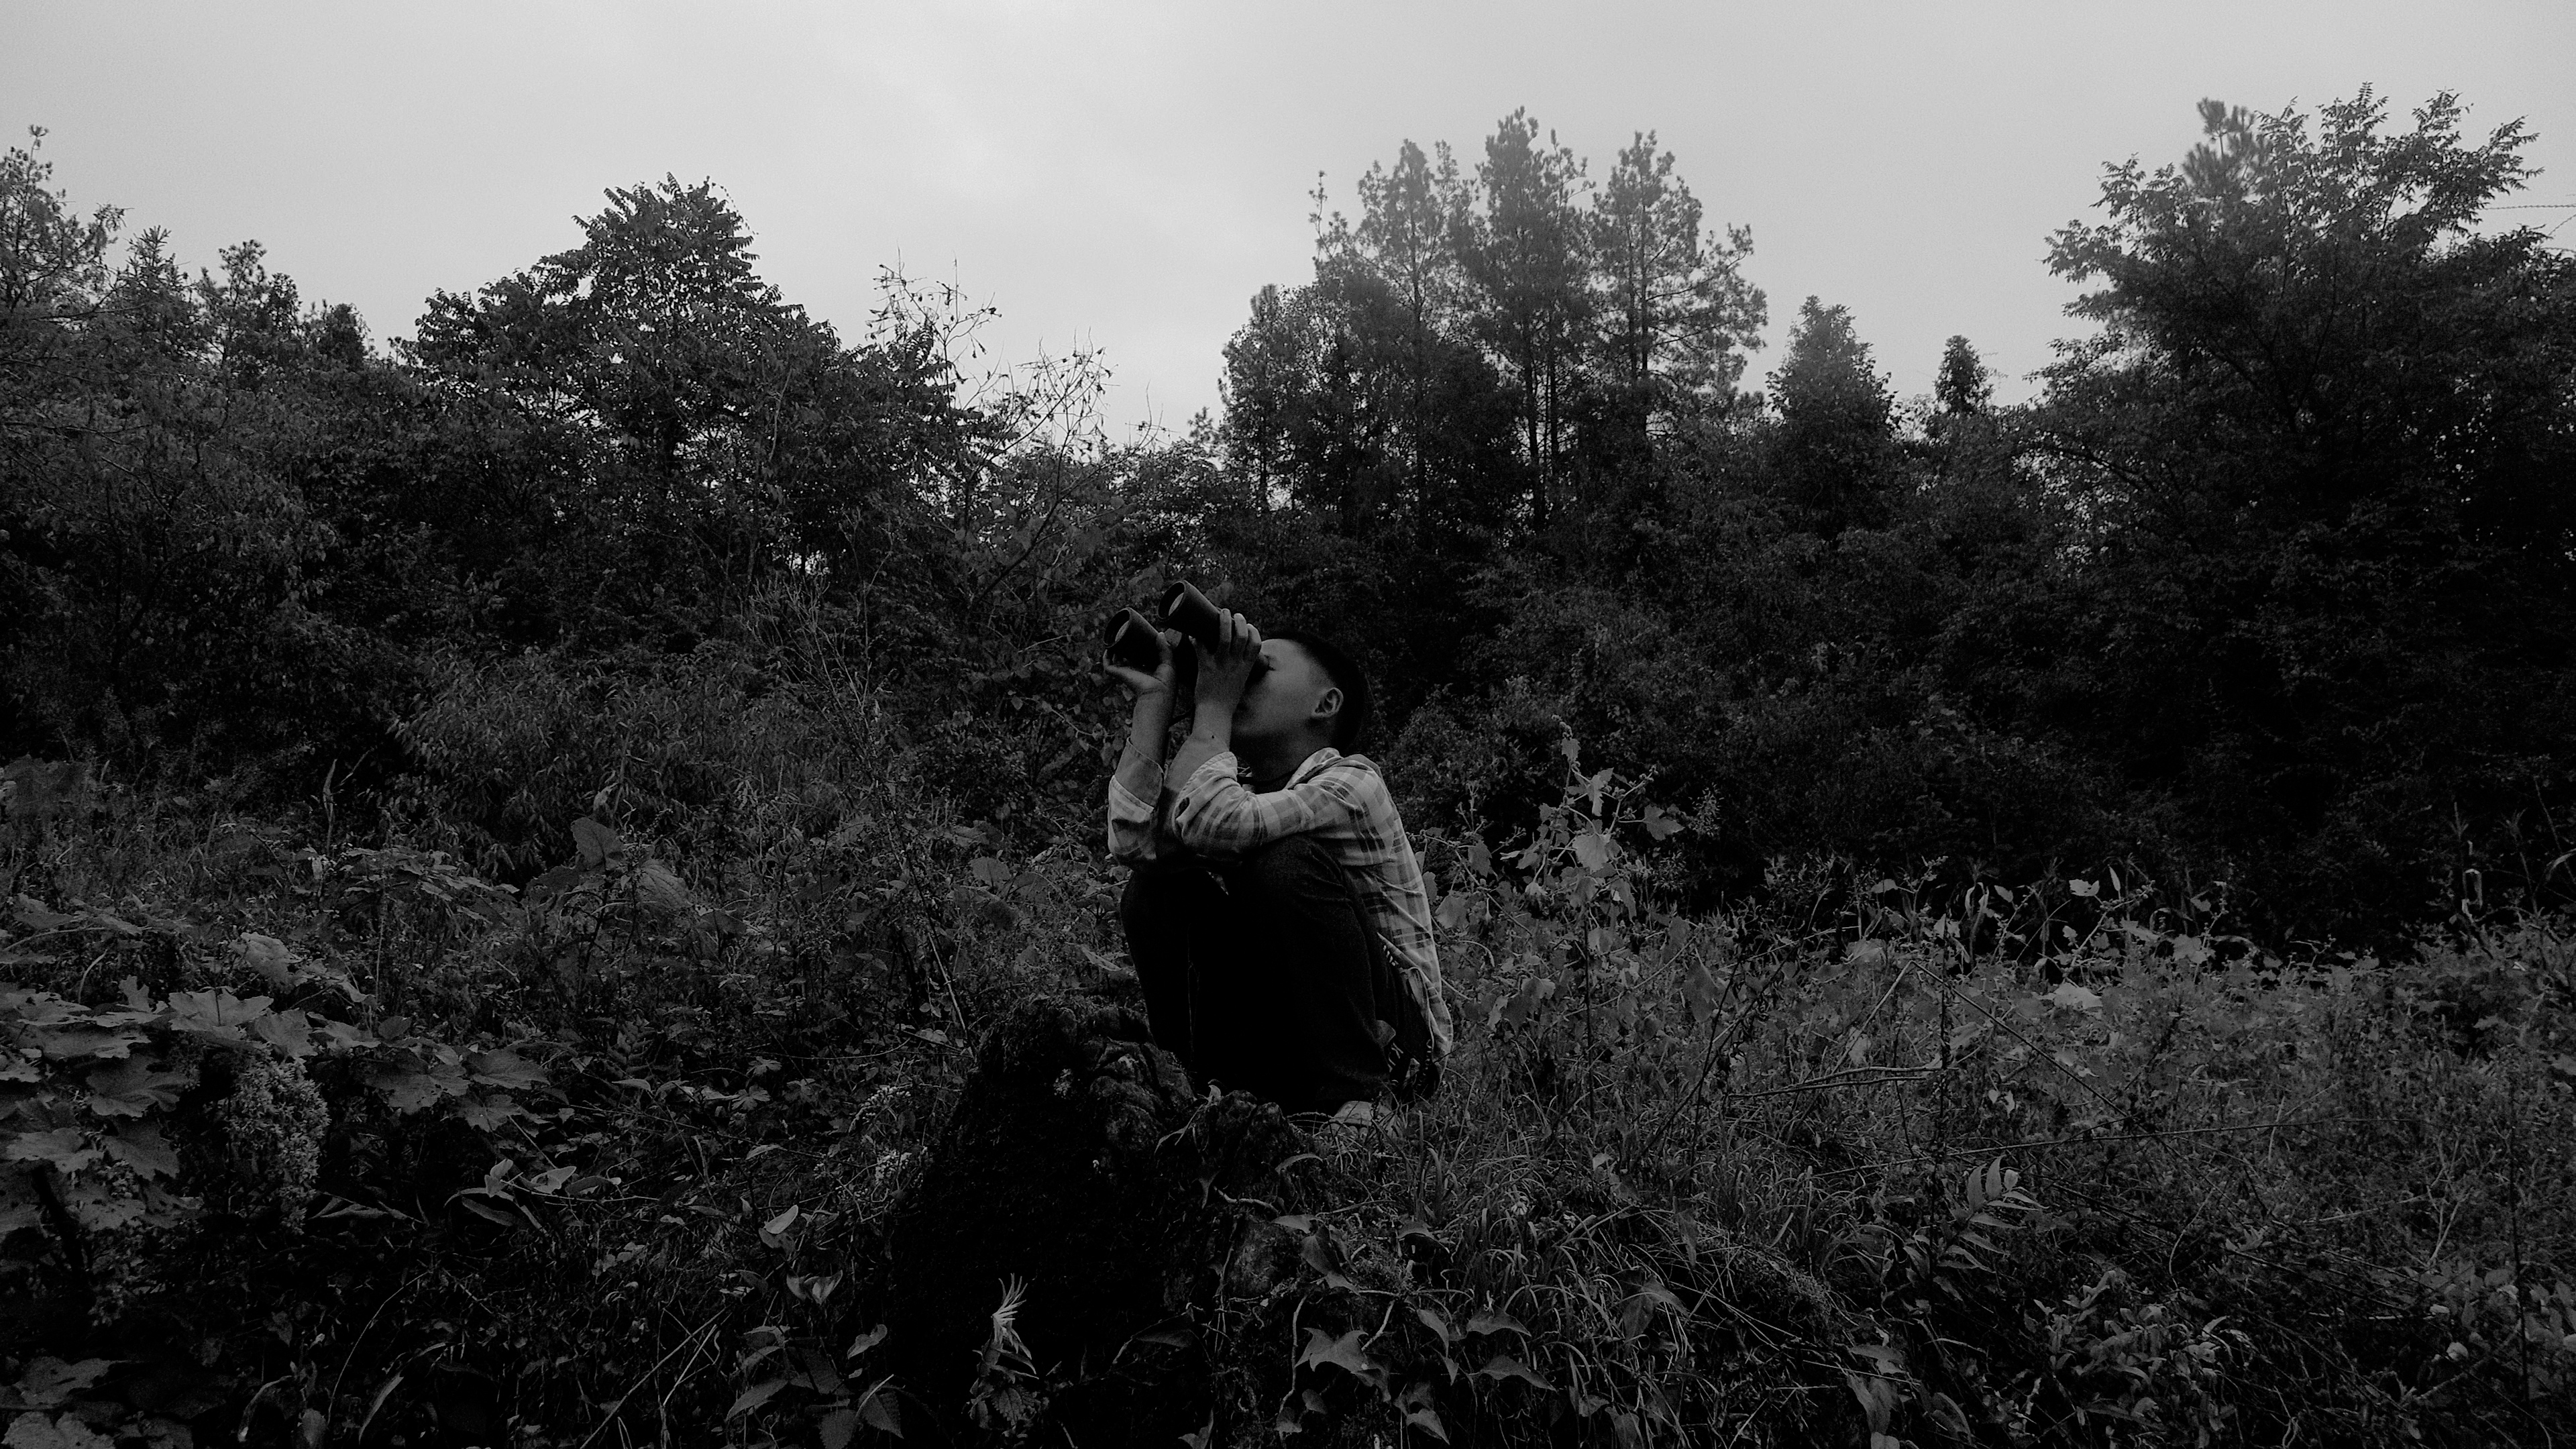 Black and white image of a person squatting in a field, looking through binoculars.